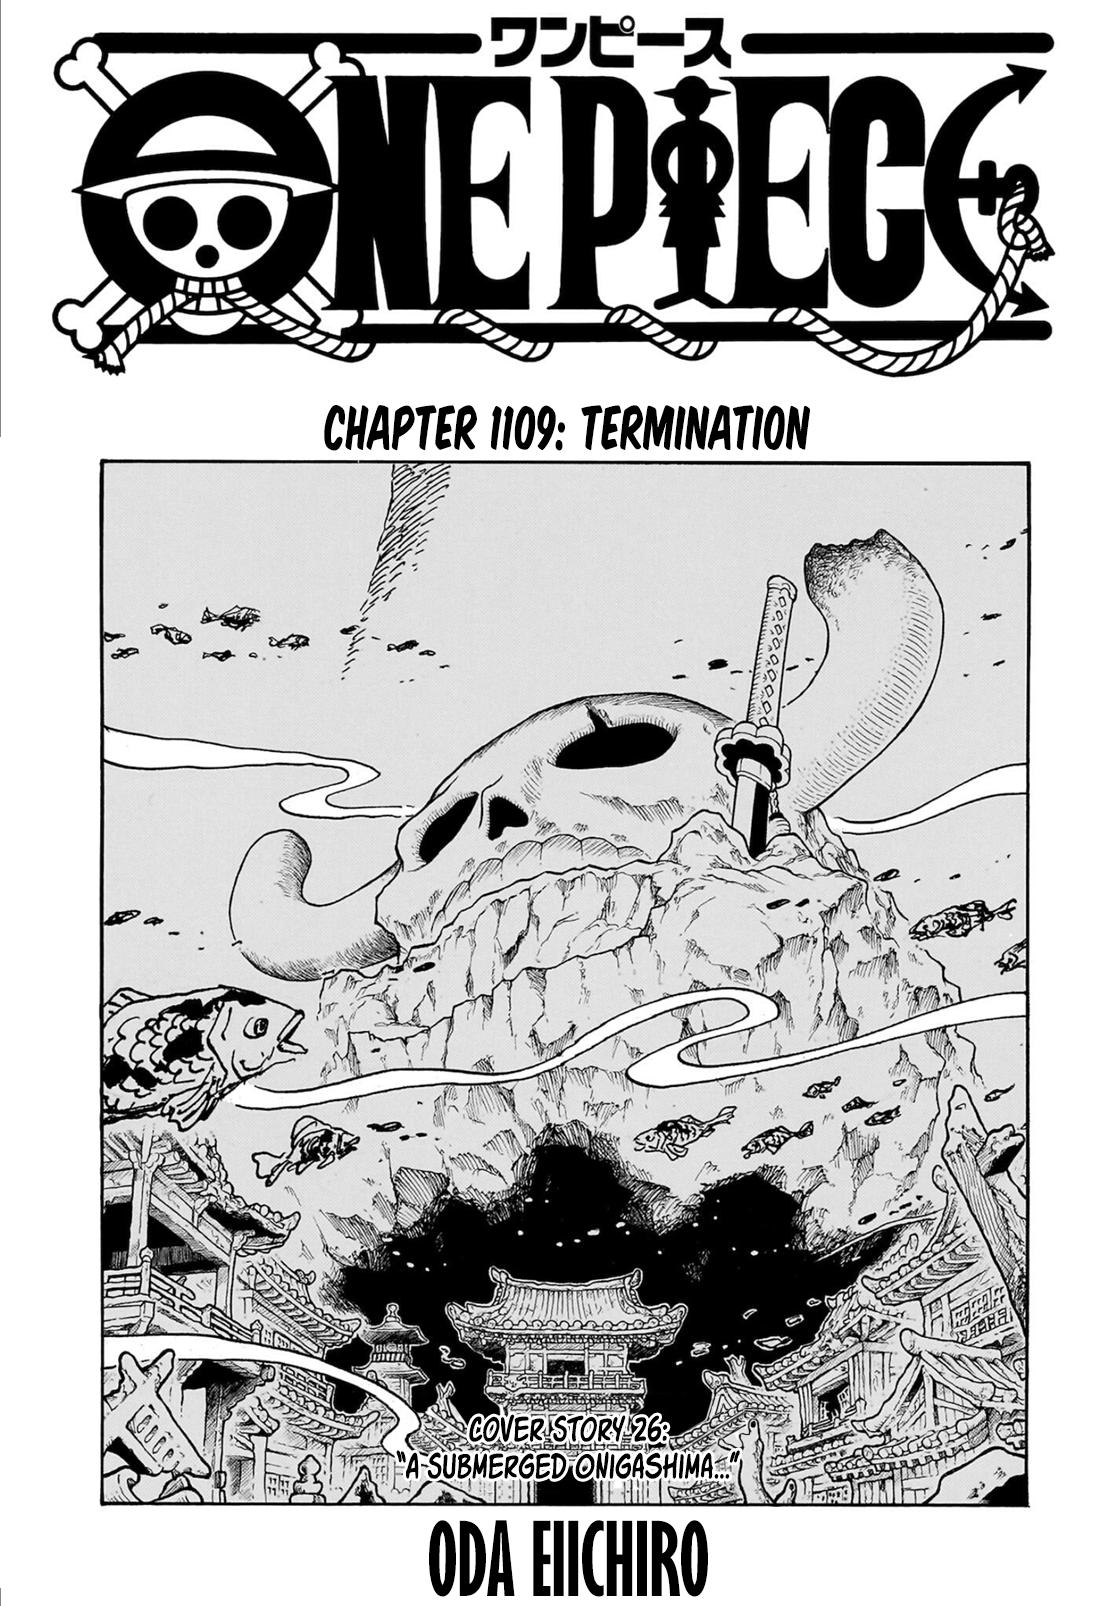 One Piece, Chapter 1109 | TcbScans Net - Free Manga Online in High 